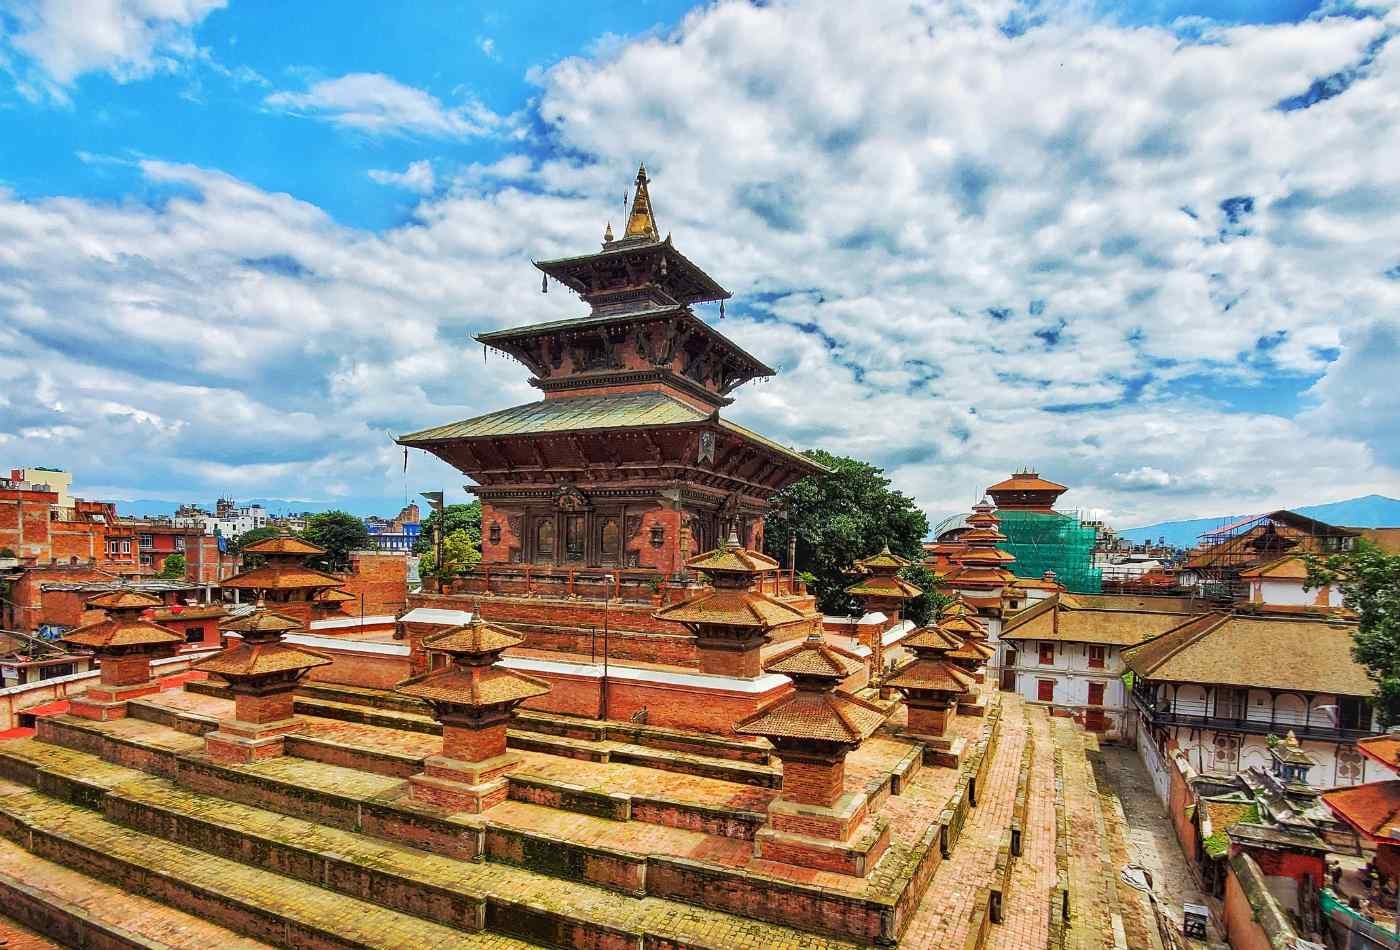 A beautiful view of the Taleju Temple, located in Kathmandu Durbar Square, with a clear blue sky in the background.